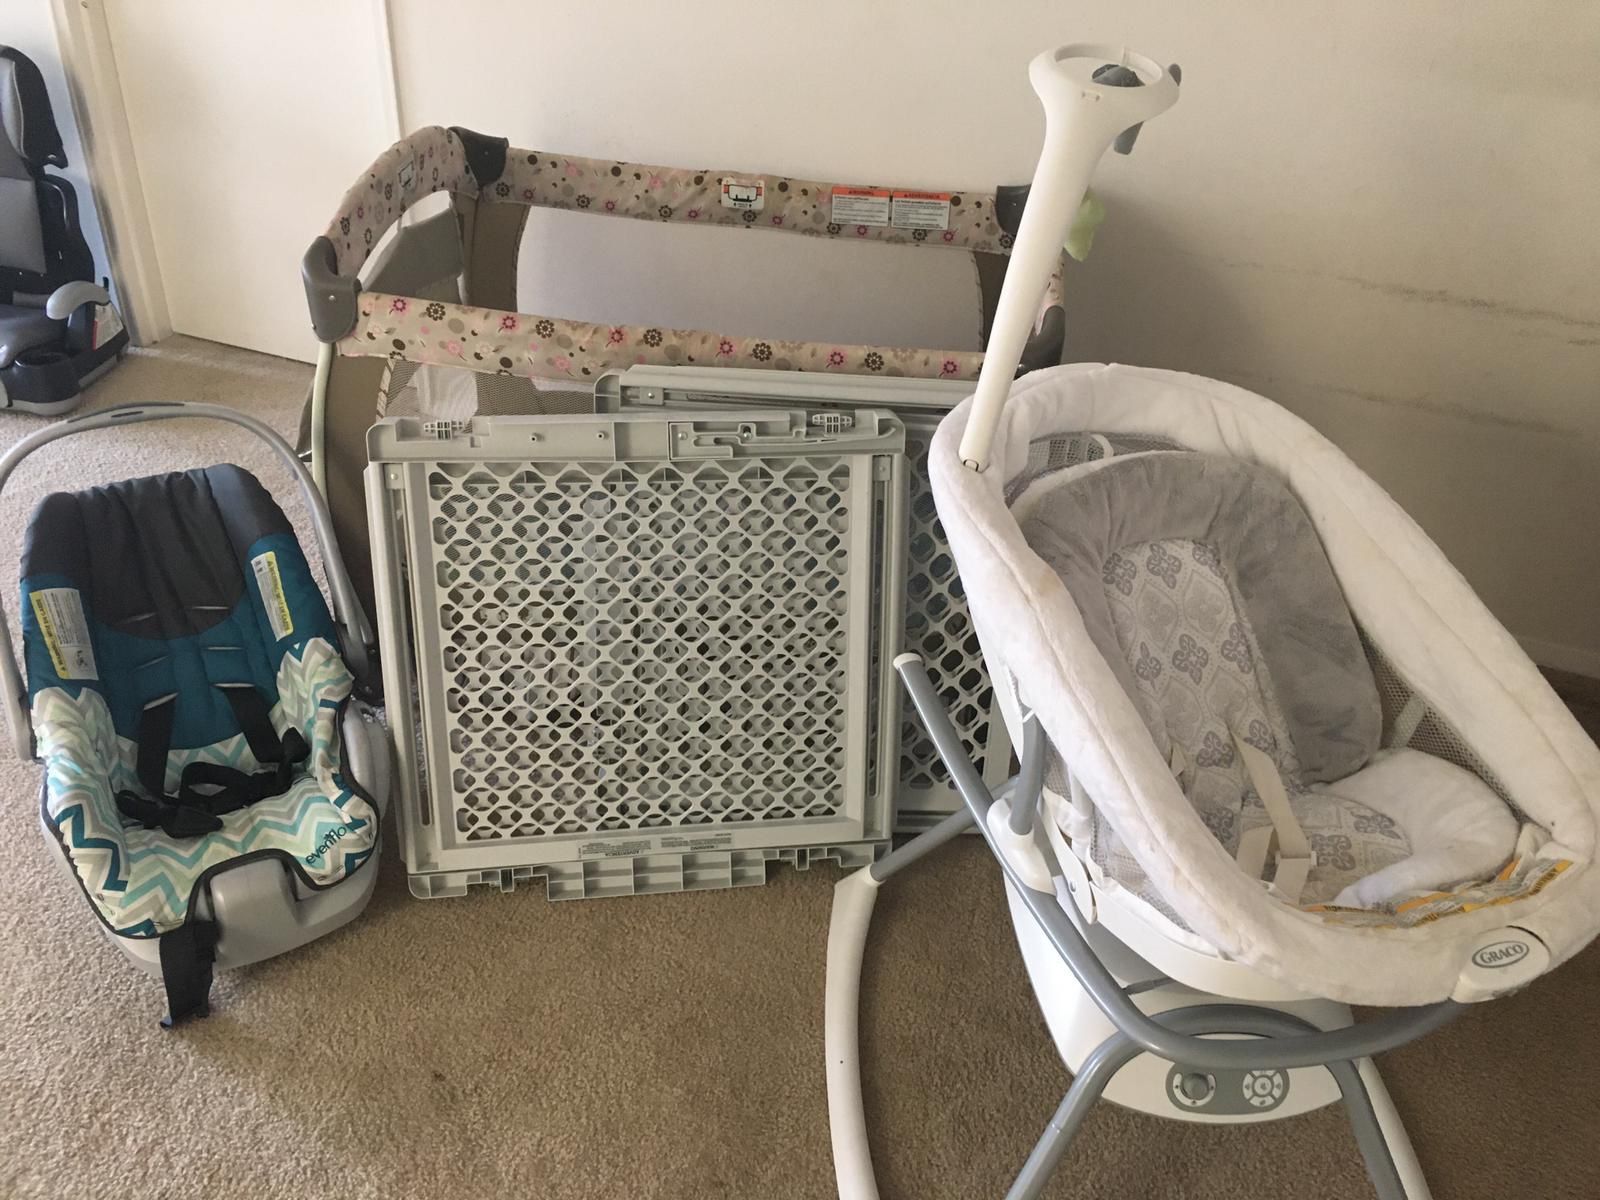 A set for baby : car seat, crib, Baby swing and 2 door locks for kids